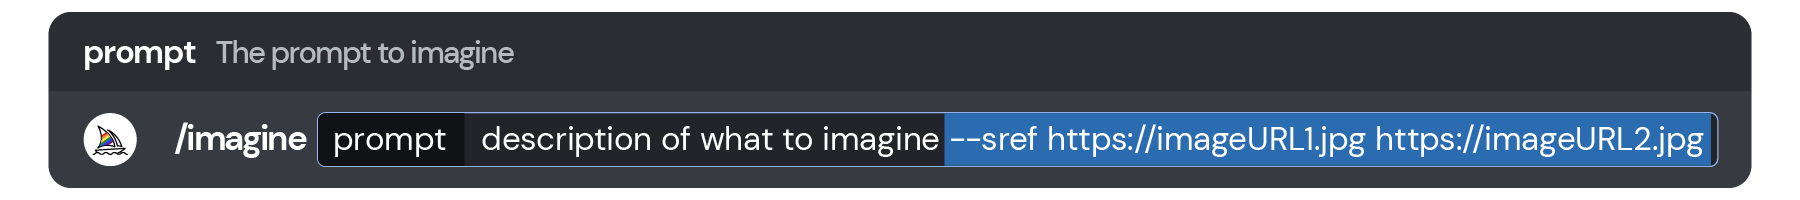 Image of the Discord message send box showing an example /imagine command using --sref style references: `/imagine prompt description of what to imagine --sref https://imageURL1.jpg https://imageURL2.jpg`